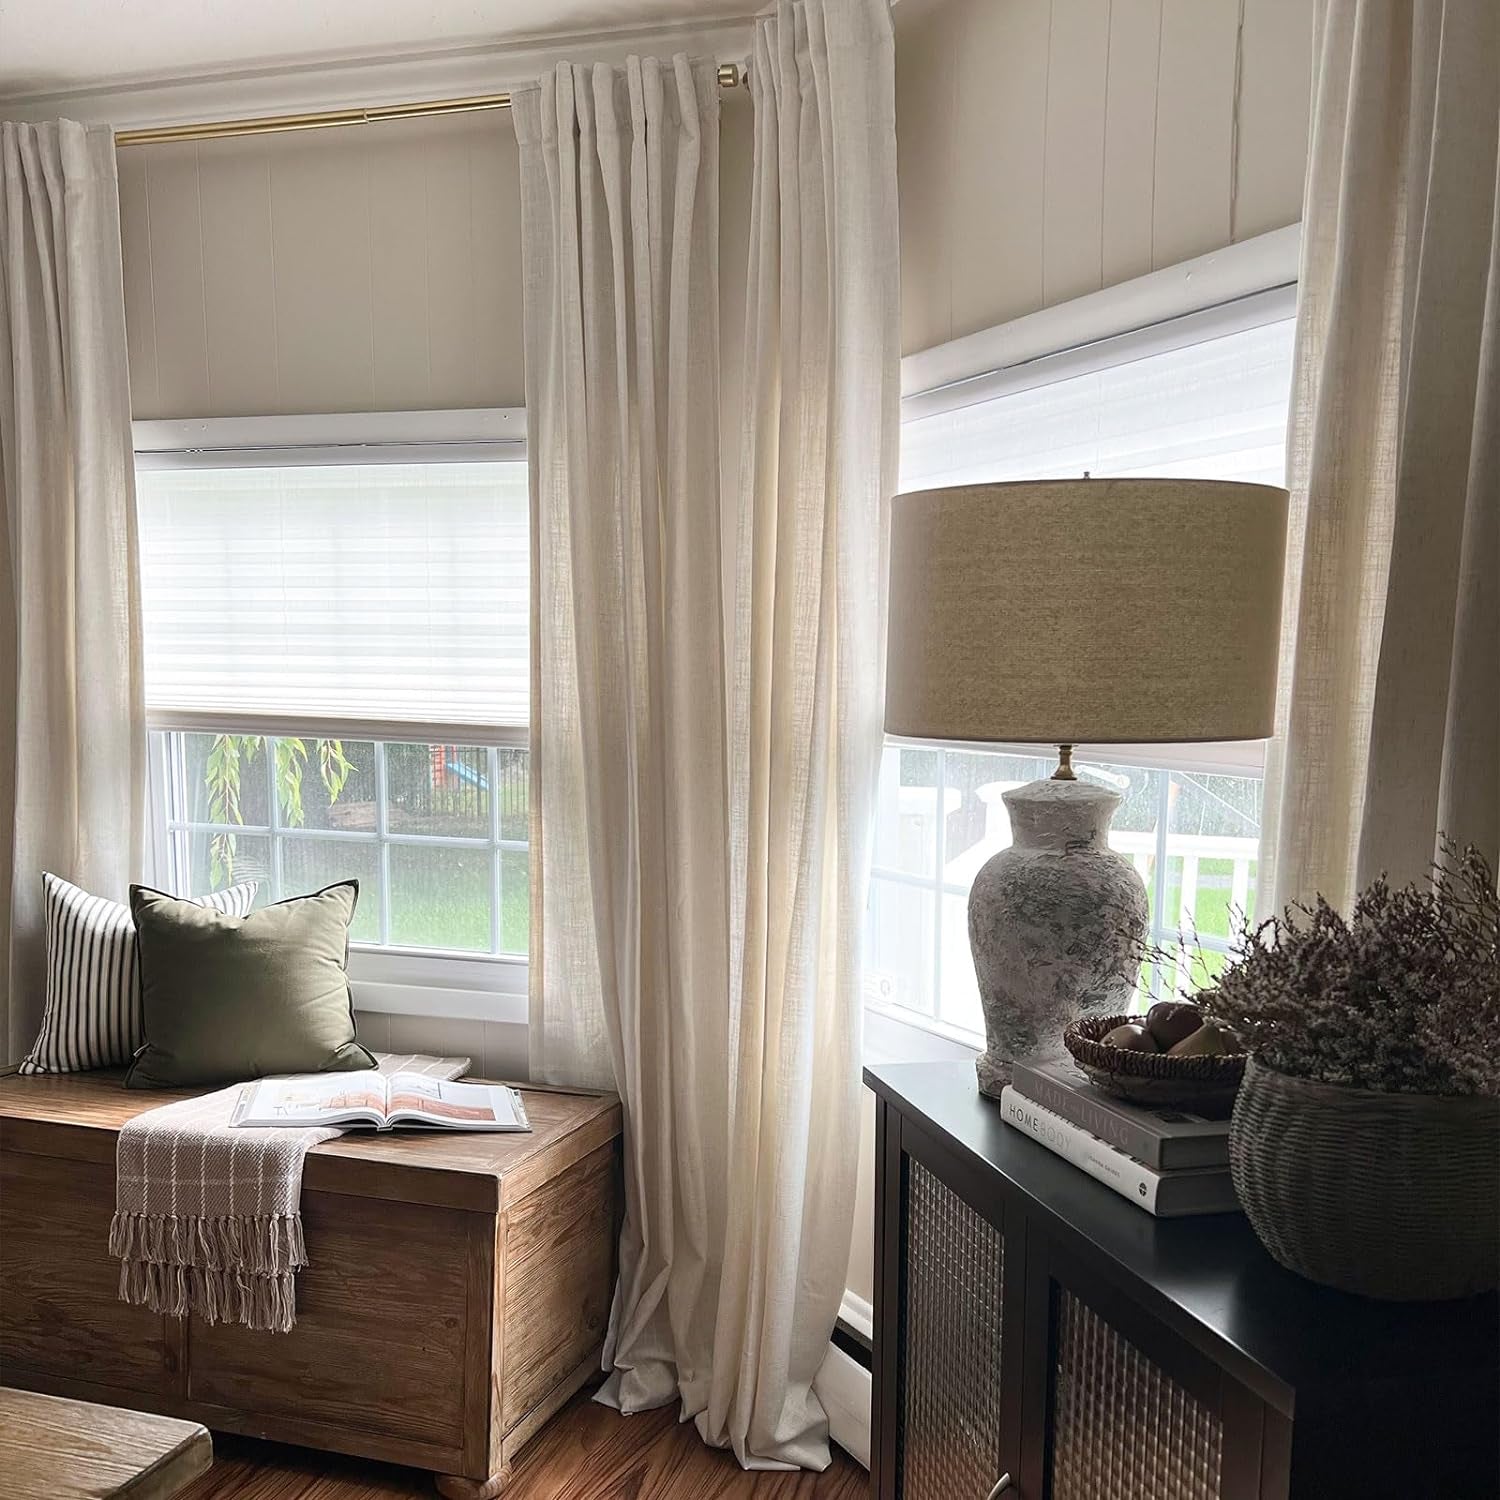 INOVADAY Beige White Linen Curtains 96 Inches Long for Living Room Bedroom, Back Tab Sheer Privacy Curtains 96 Inch Length 2 Panels, Light Filtering Farmhouse Curtains & Drapes Cream Colored, W50Xl96  INOVADAY   